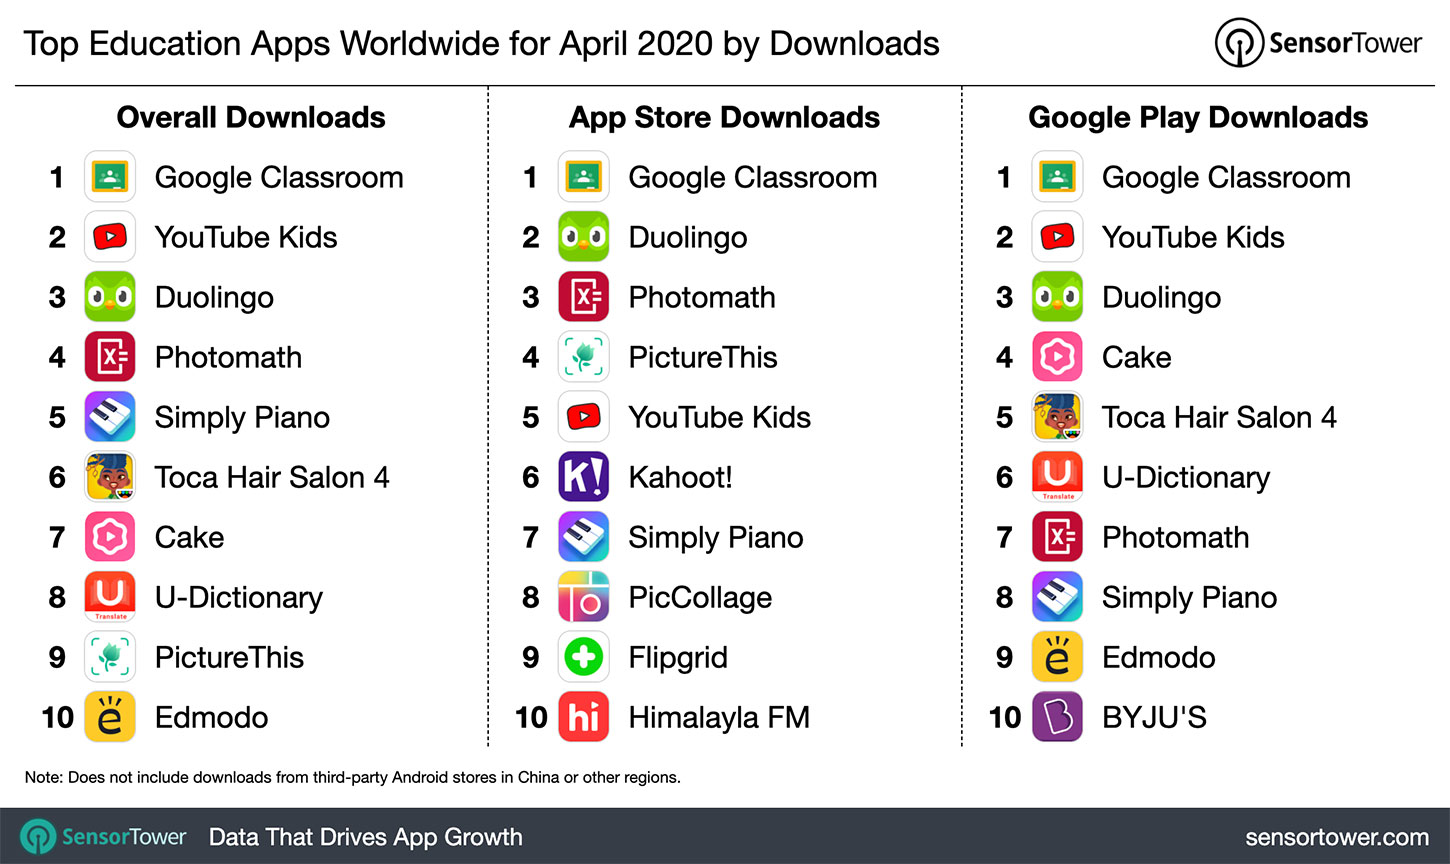 Top Education Apps Worldwide for April 2020 by Downloads